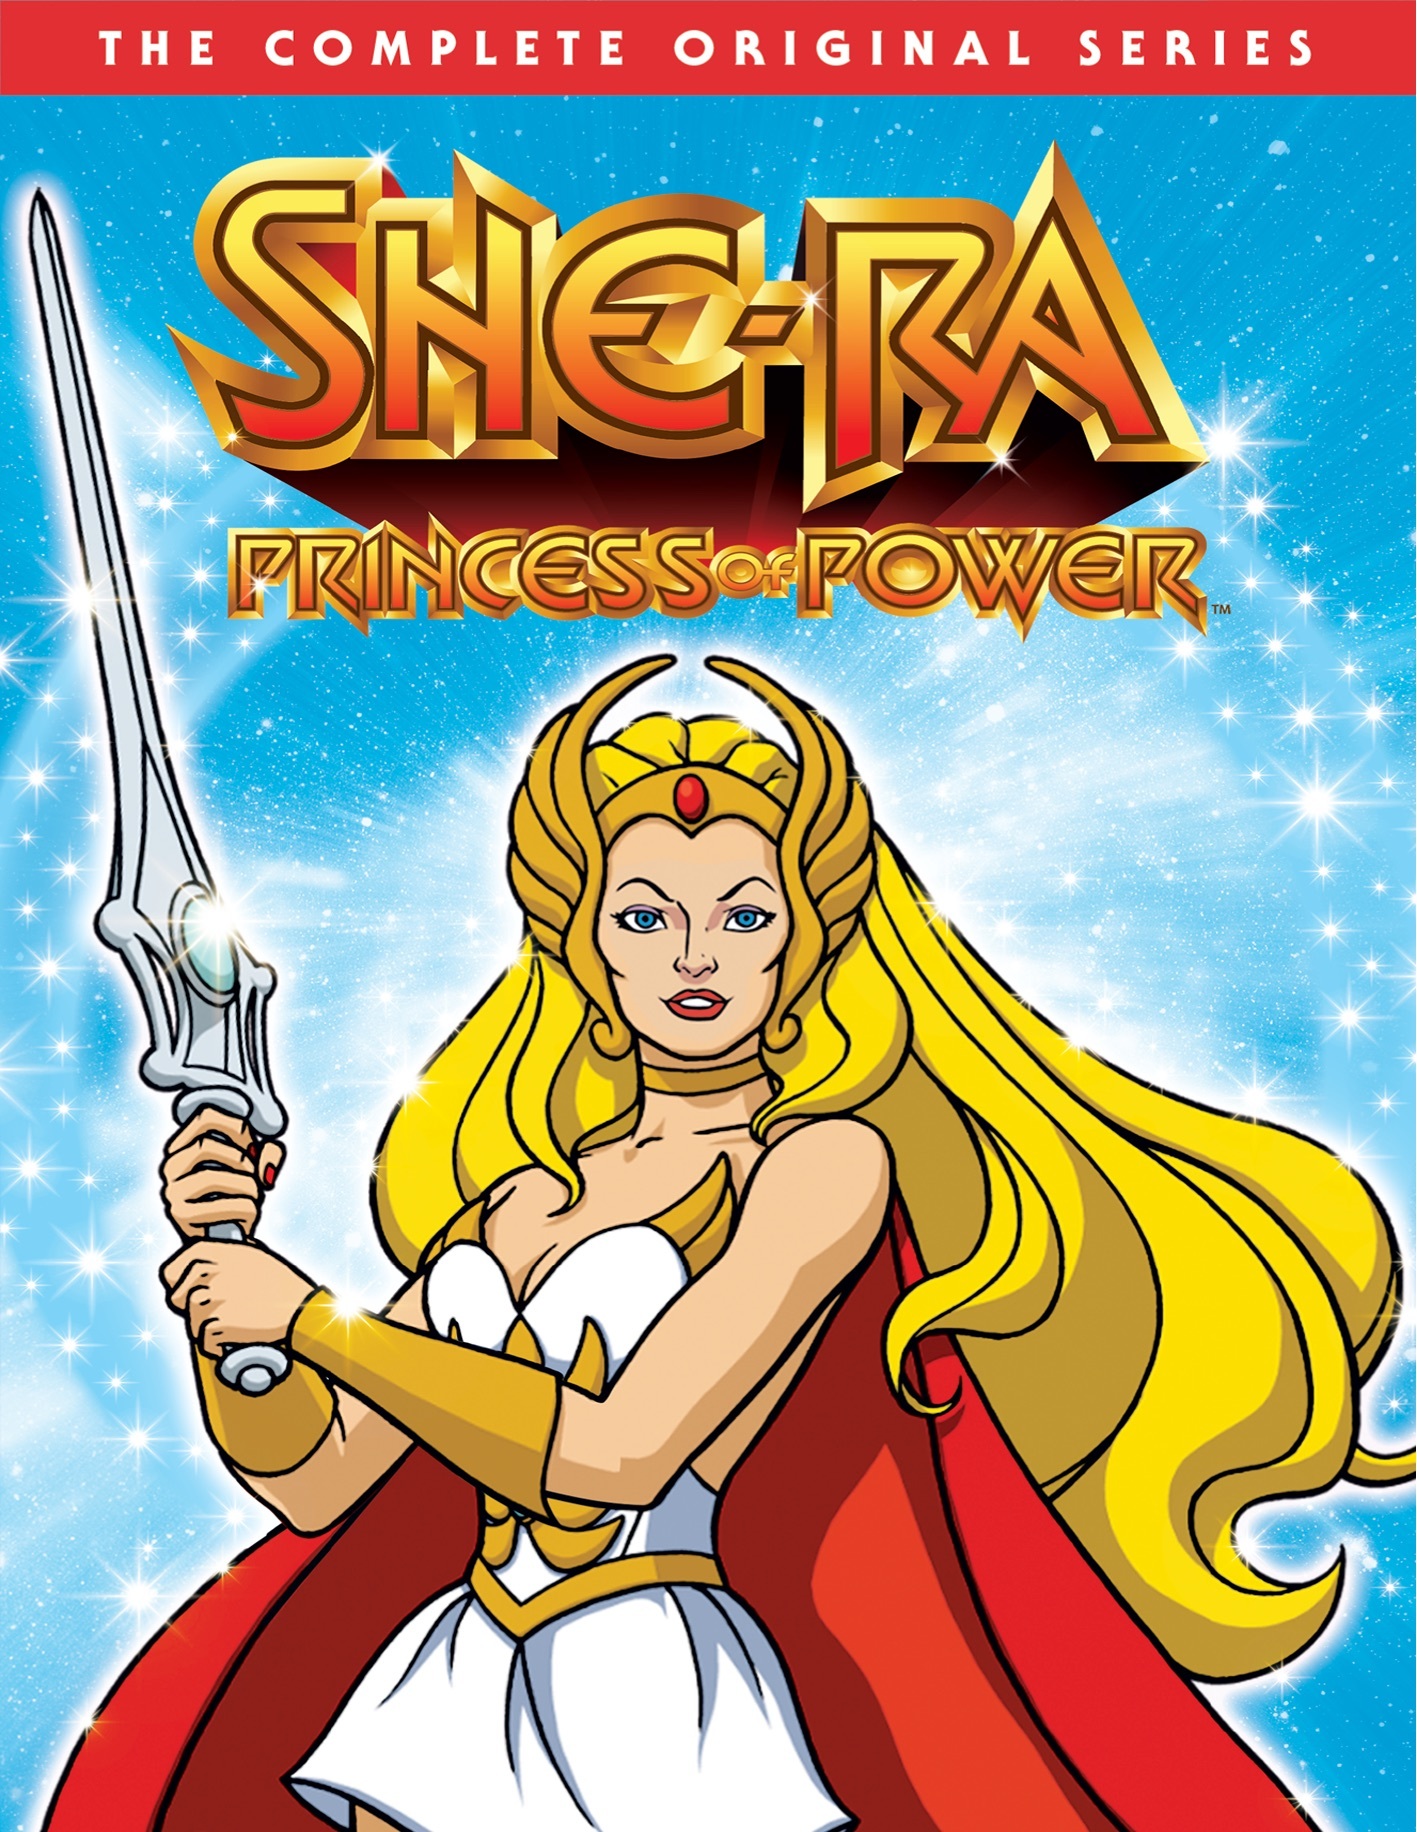 THE FIRST program of the new SheRa series shows, from 